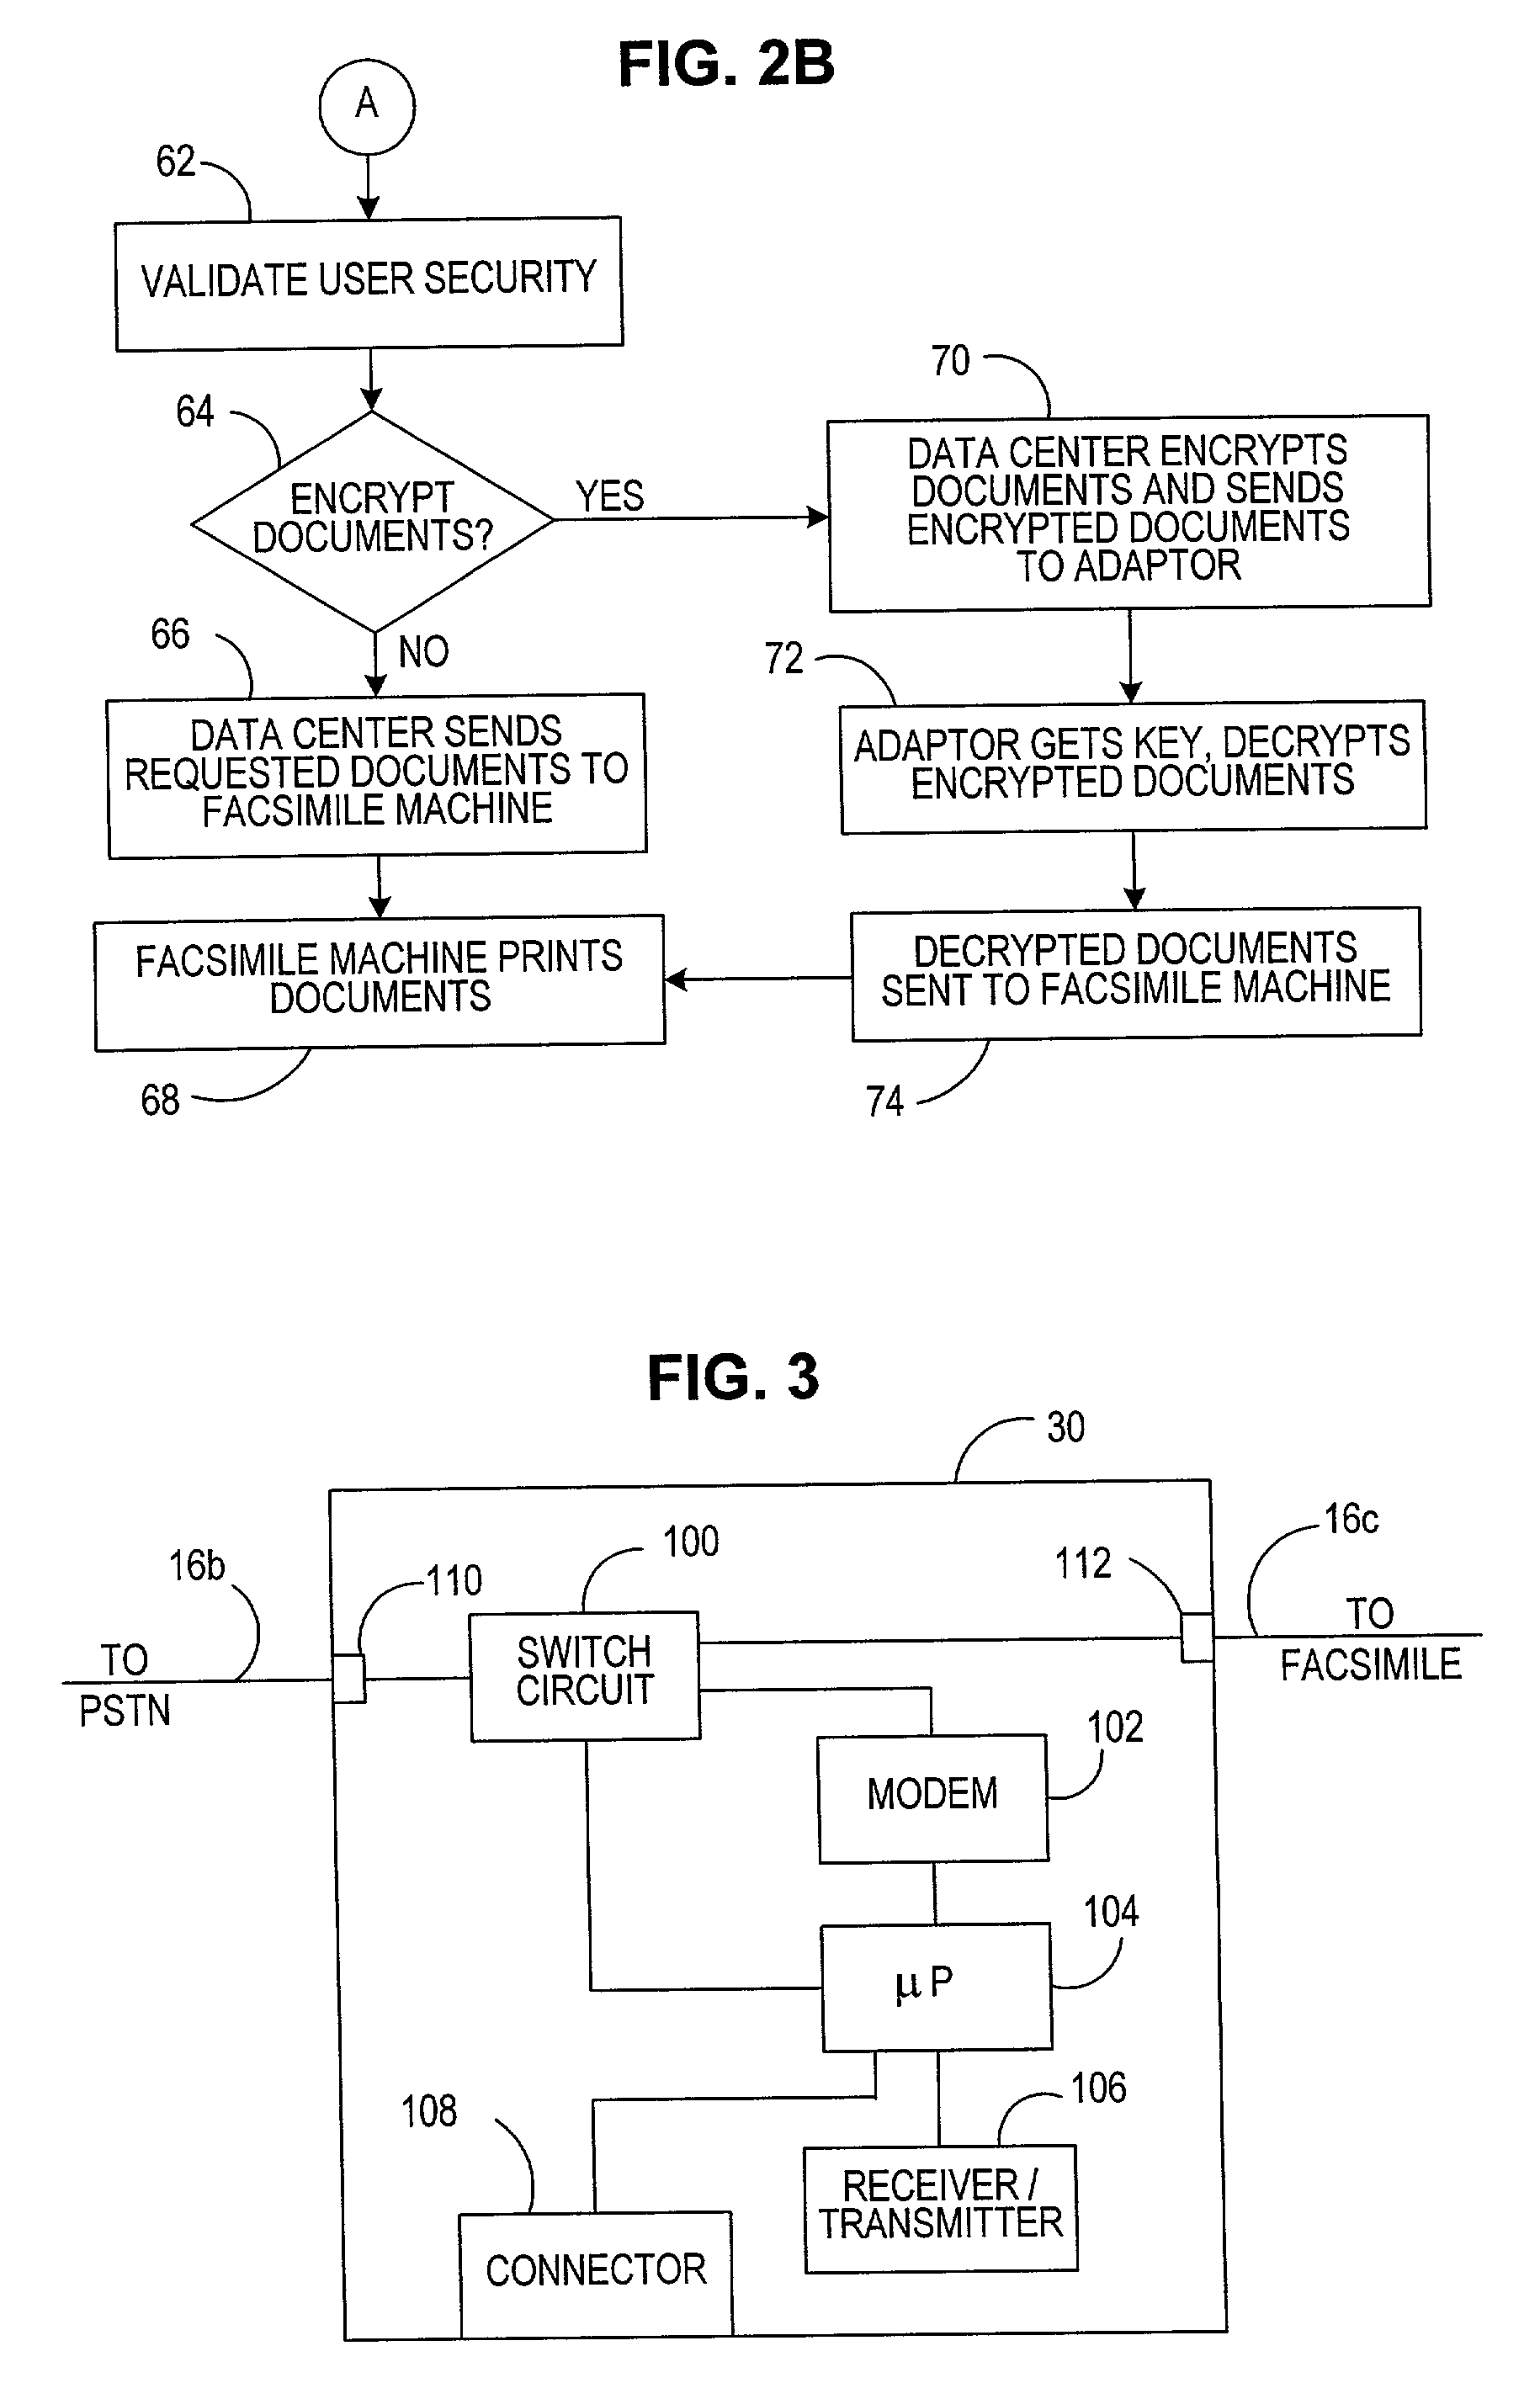 Method and system for secure delivery and retrieval of documents utilizing a facsimile machine